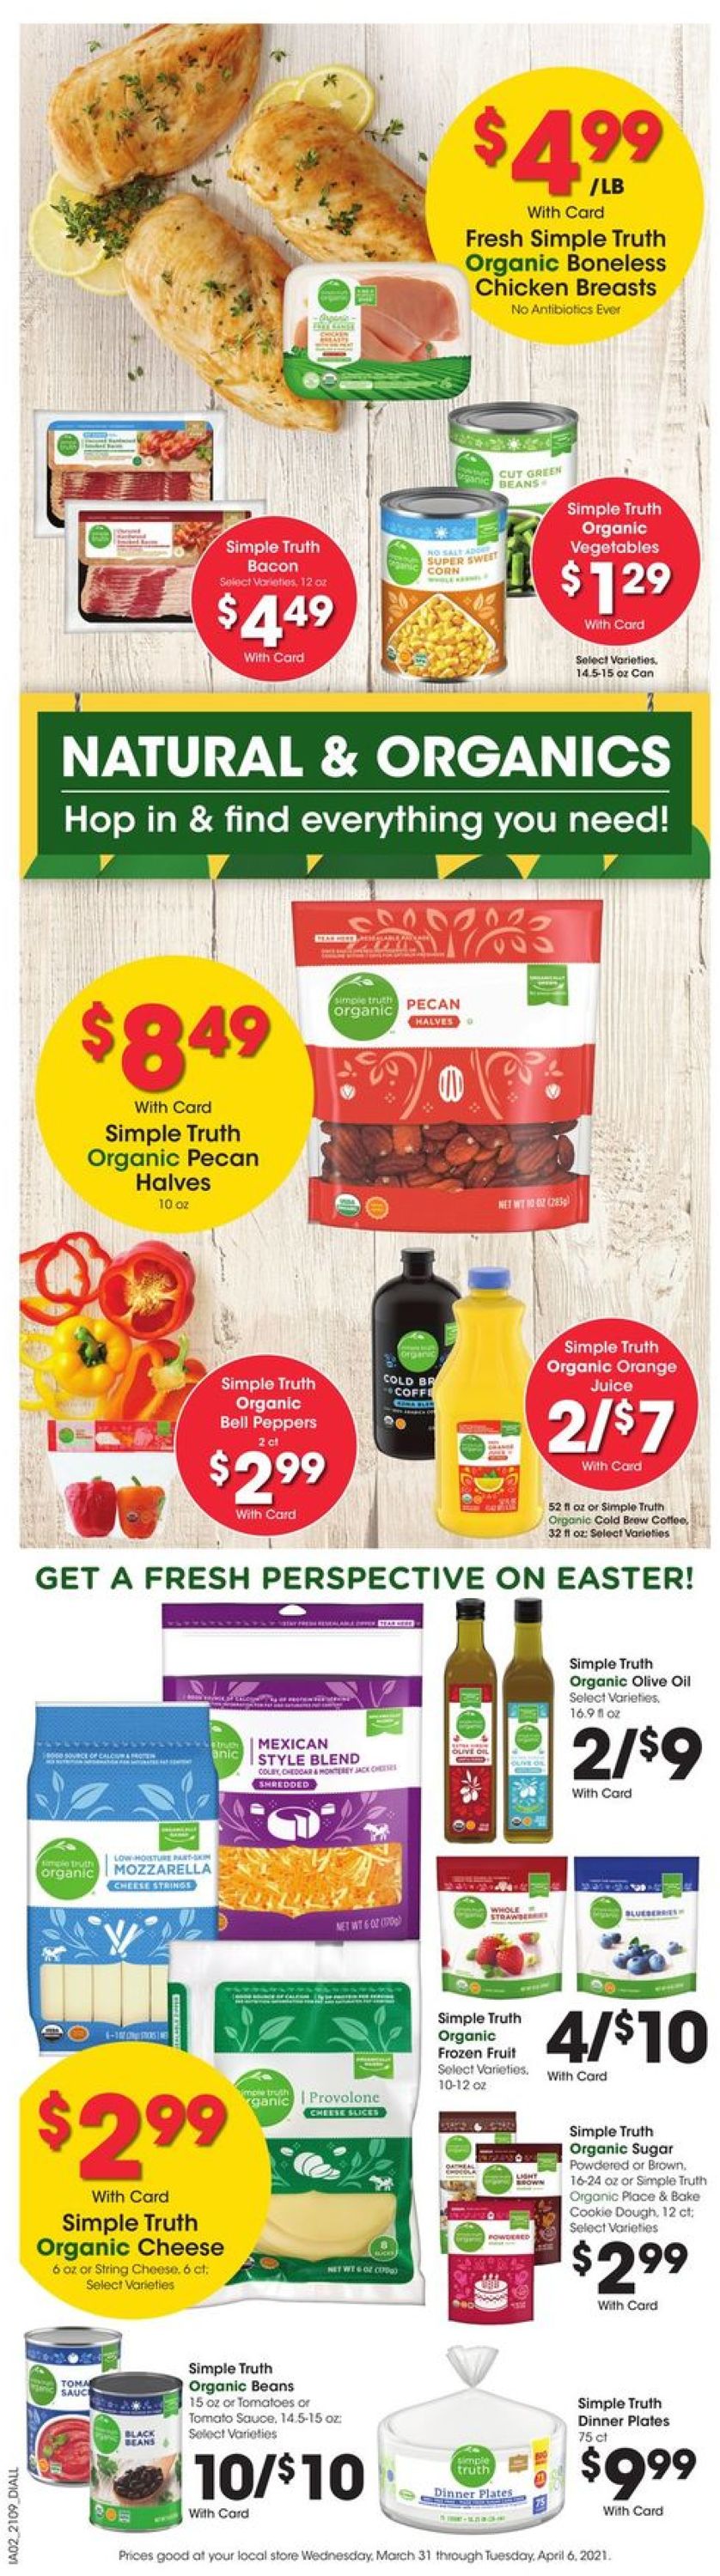 Dillons - Easter 2021 Weekly Ad Circular - valid 03/31-04/06/2021 (Page 7)